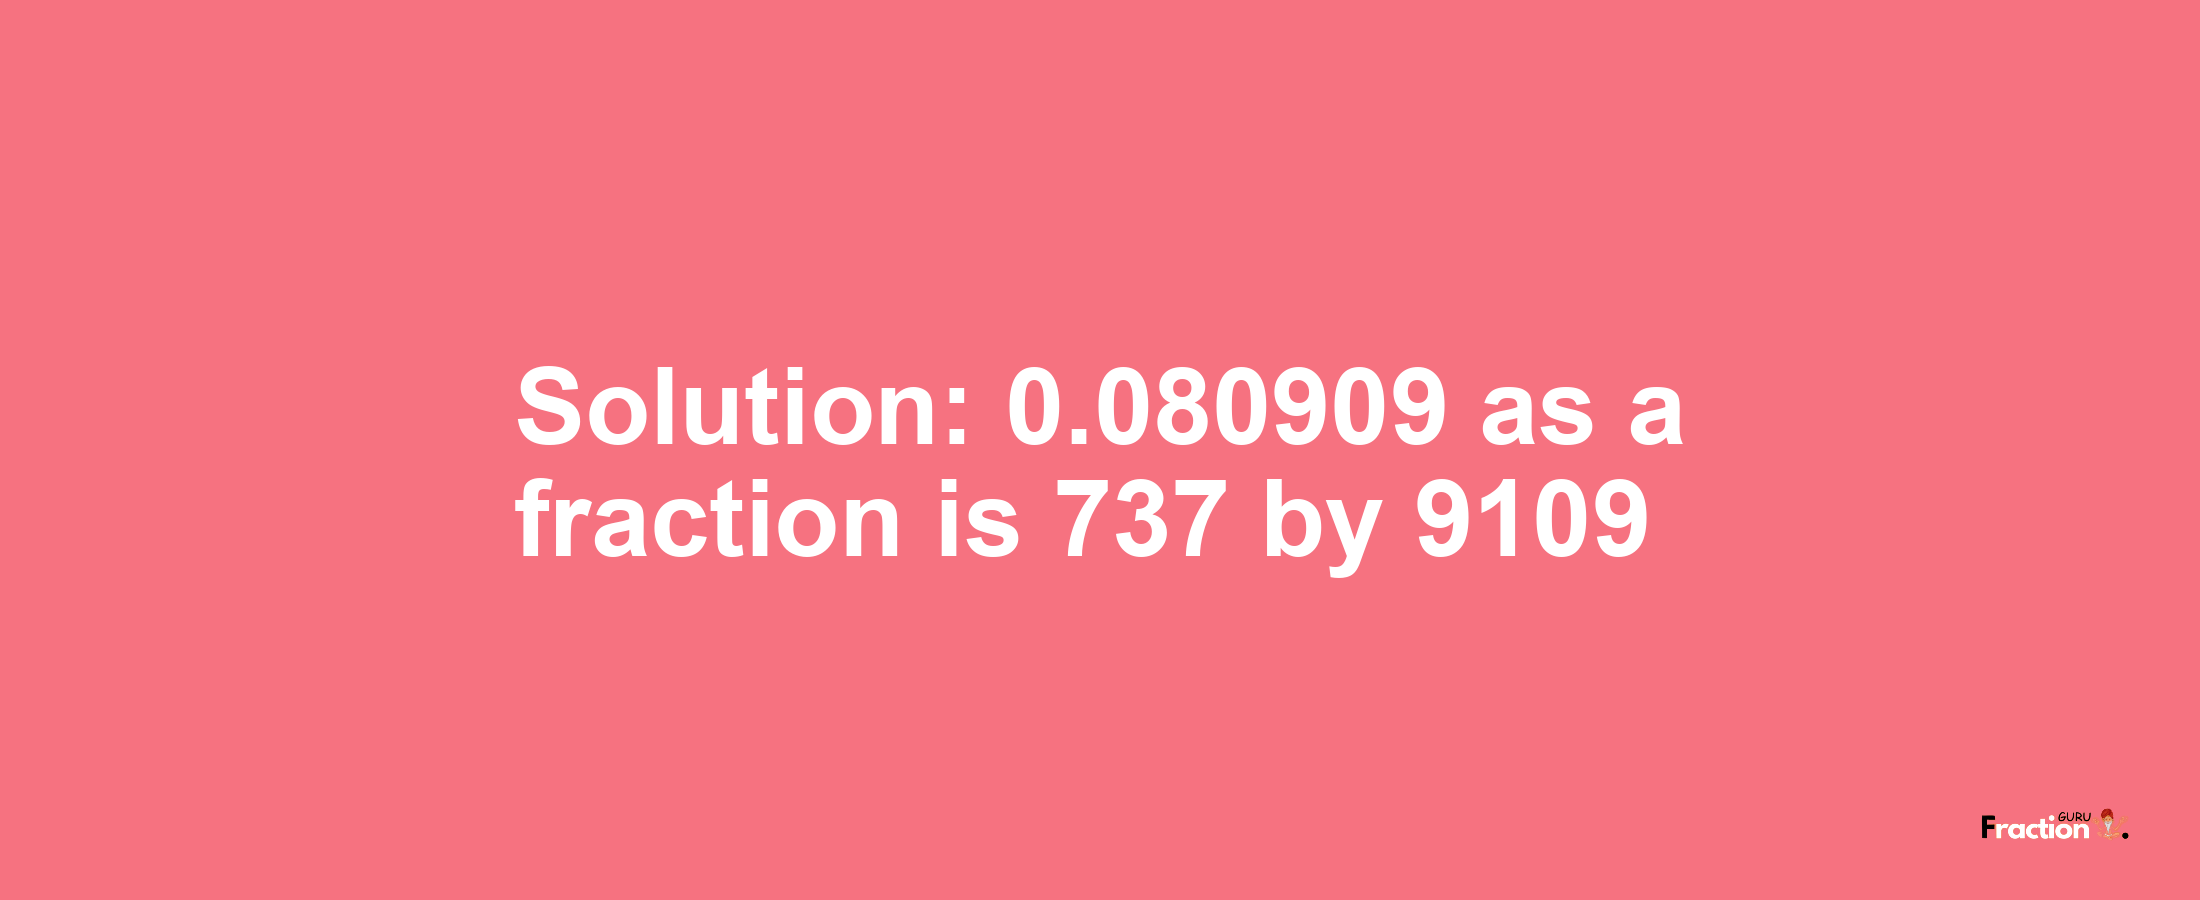 Solution:0.080909 as a fraction is 737/9109